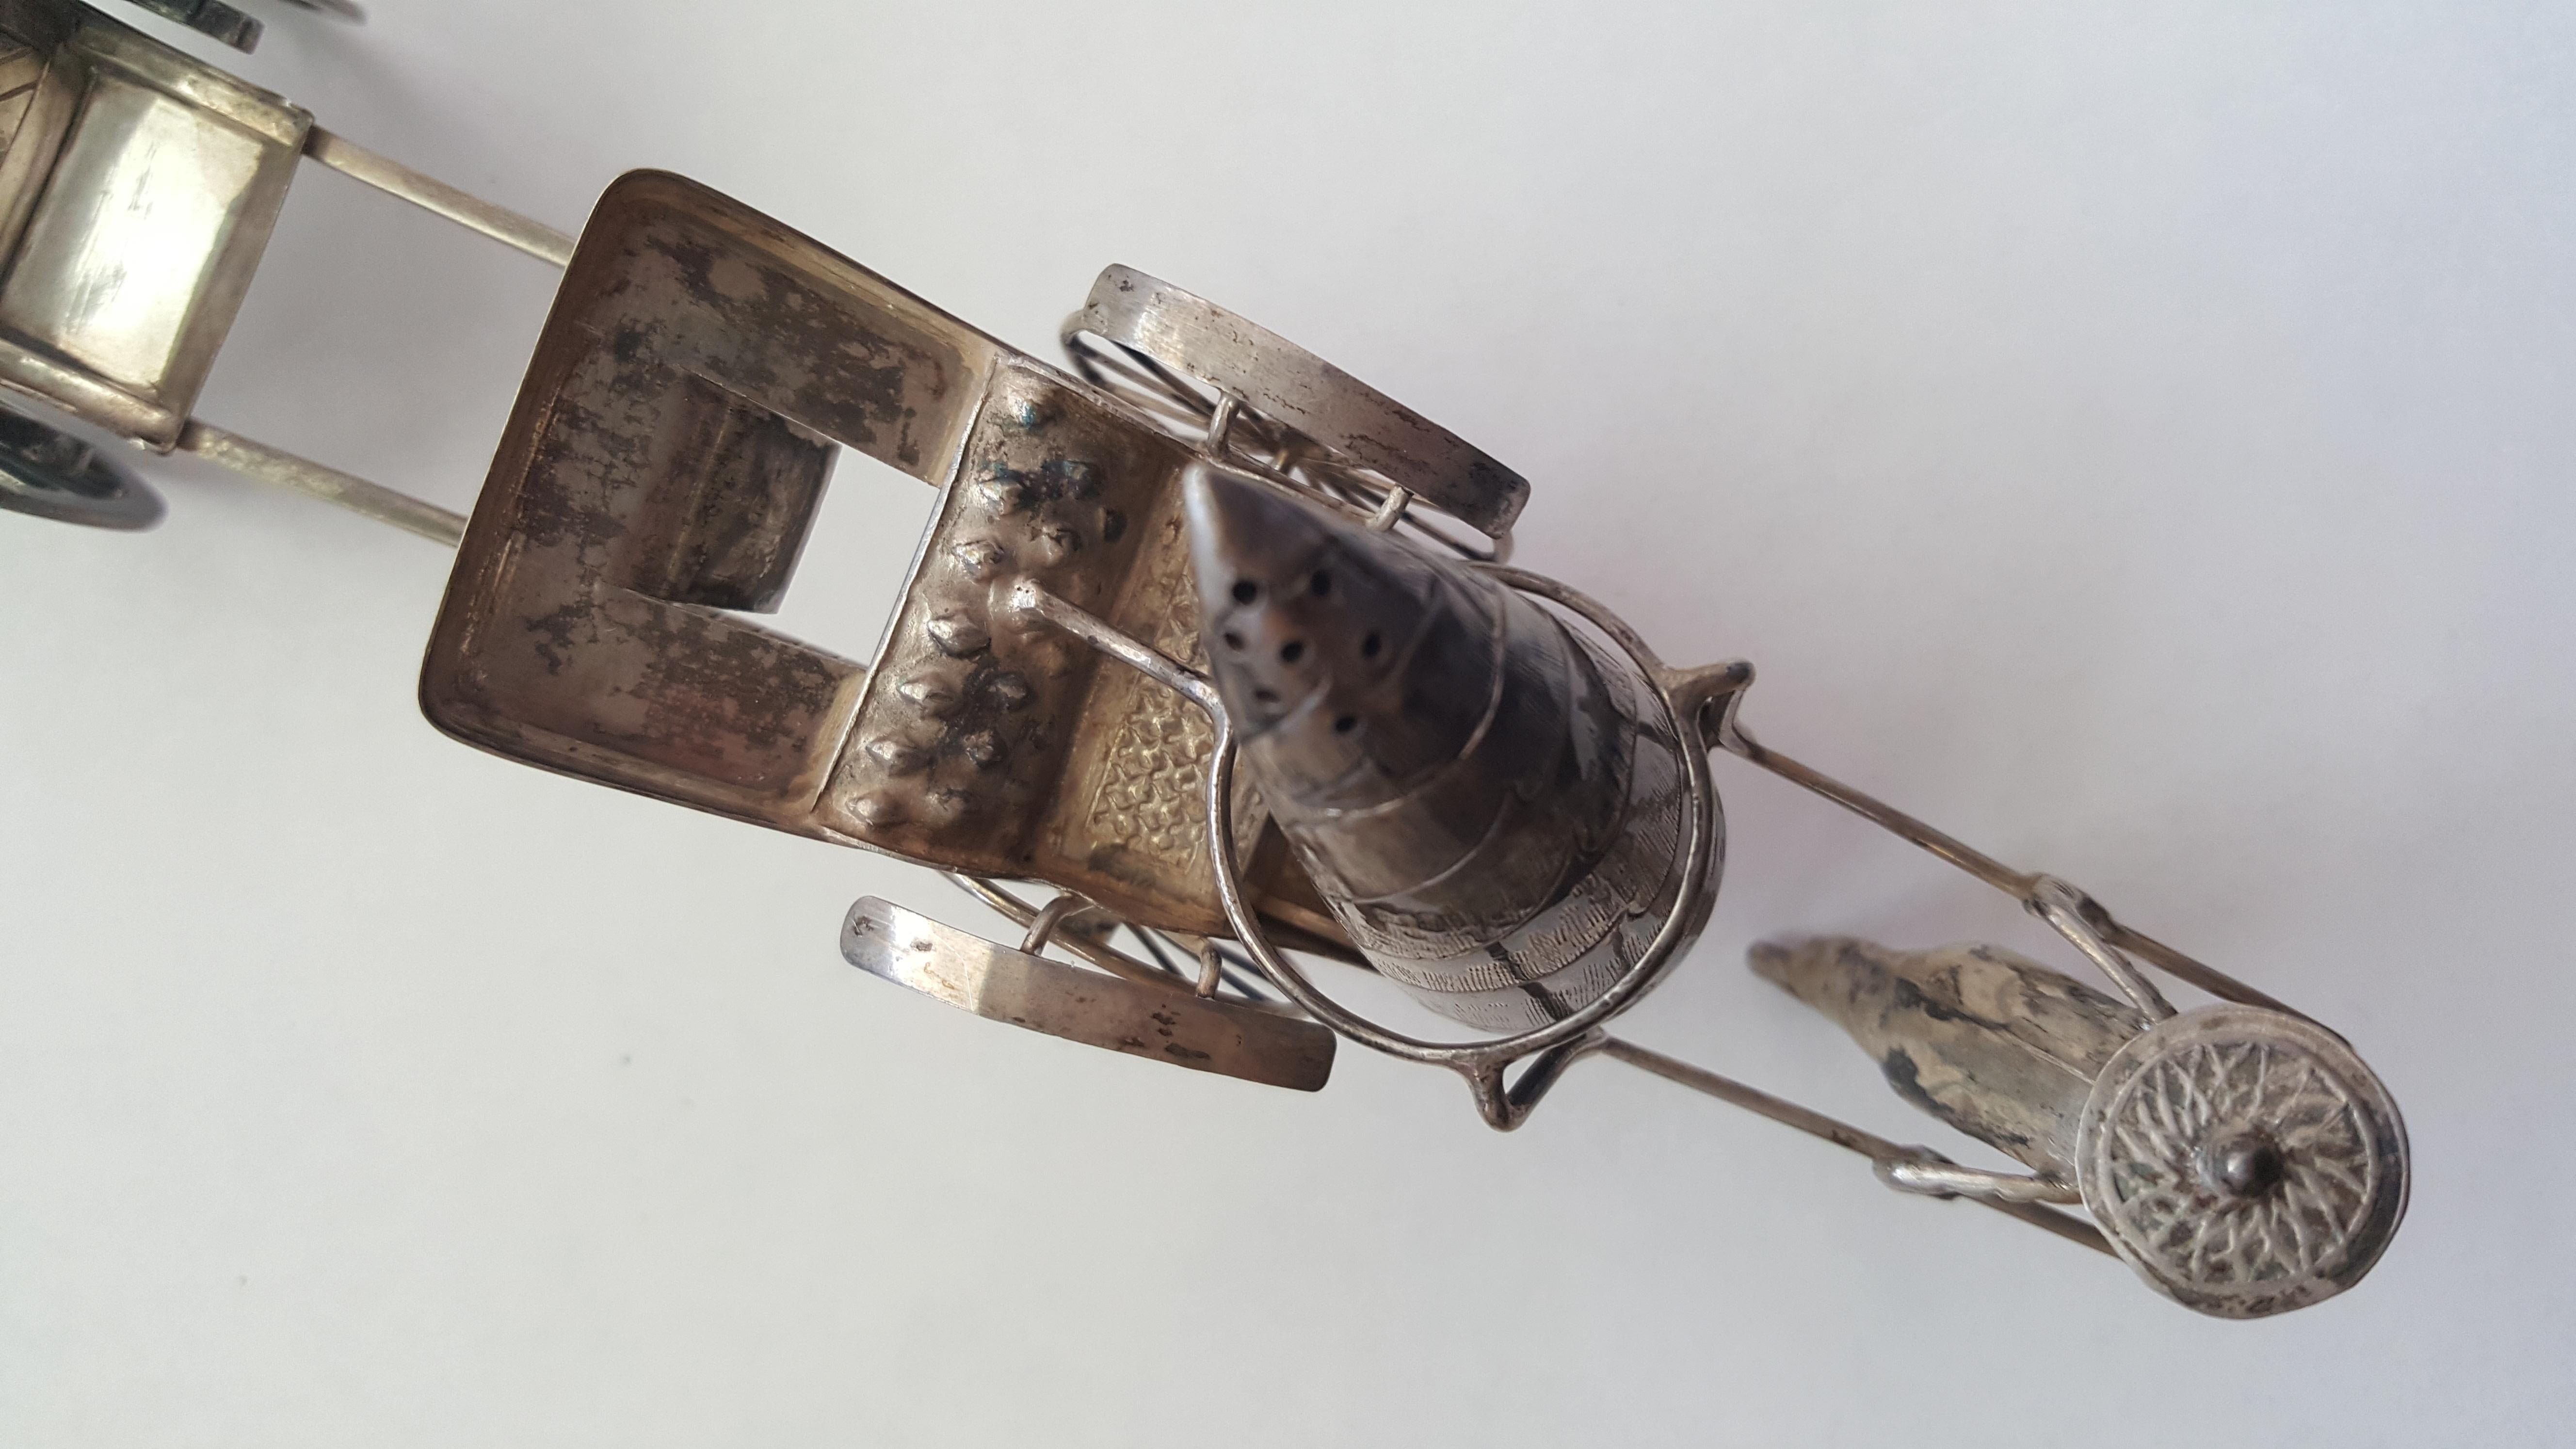 Vintage Silver Salt and Pepper Shaker, Asian, Two Rickshaw Carts Pulled by Man 1